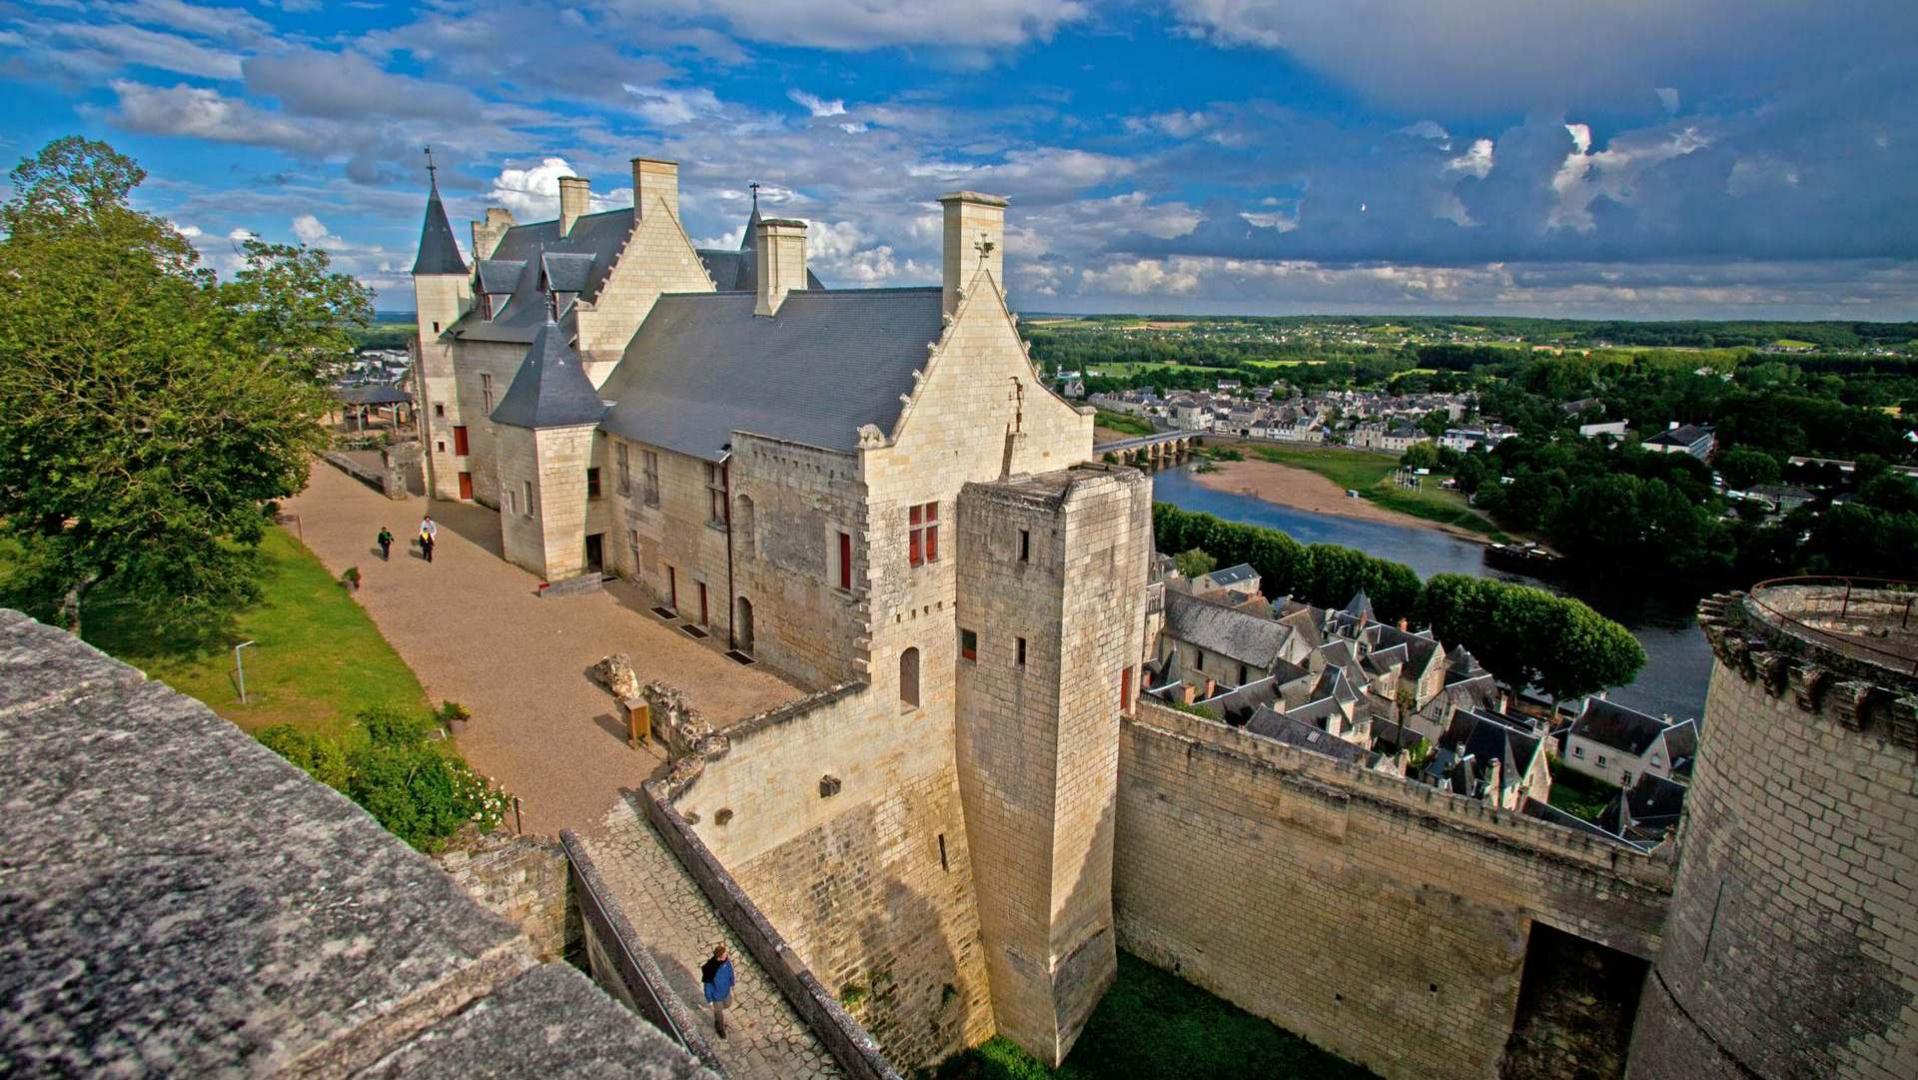 THE ROYAL FORTRESS OF CHINON, The Loire Valley, a journey through France